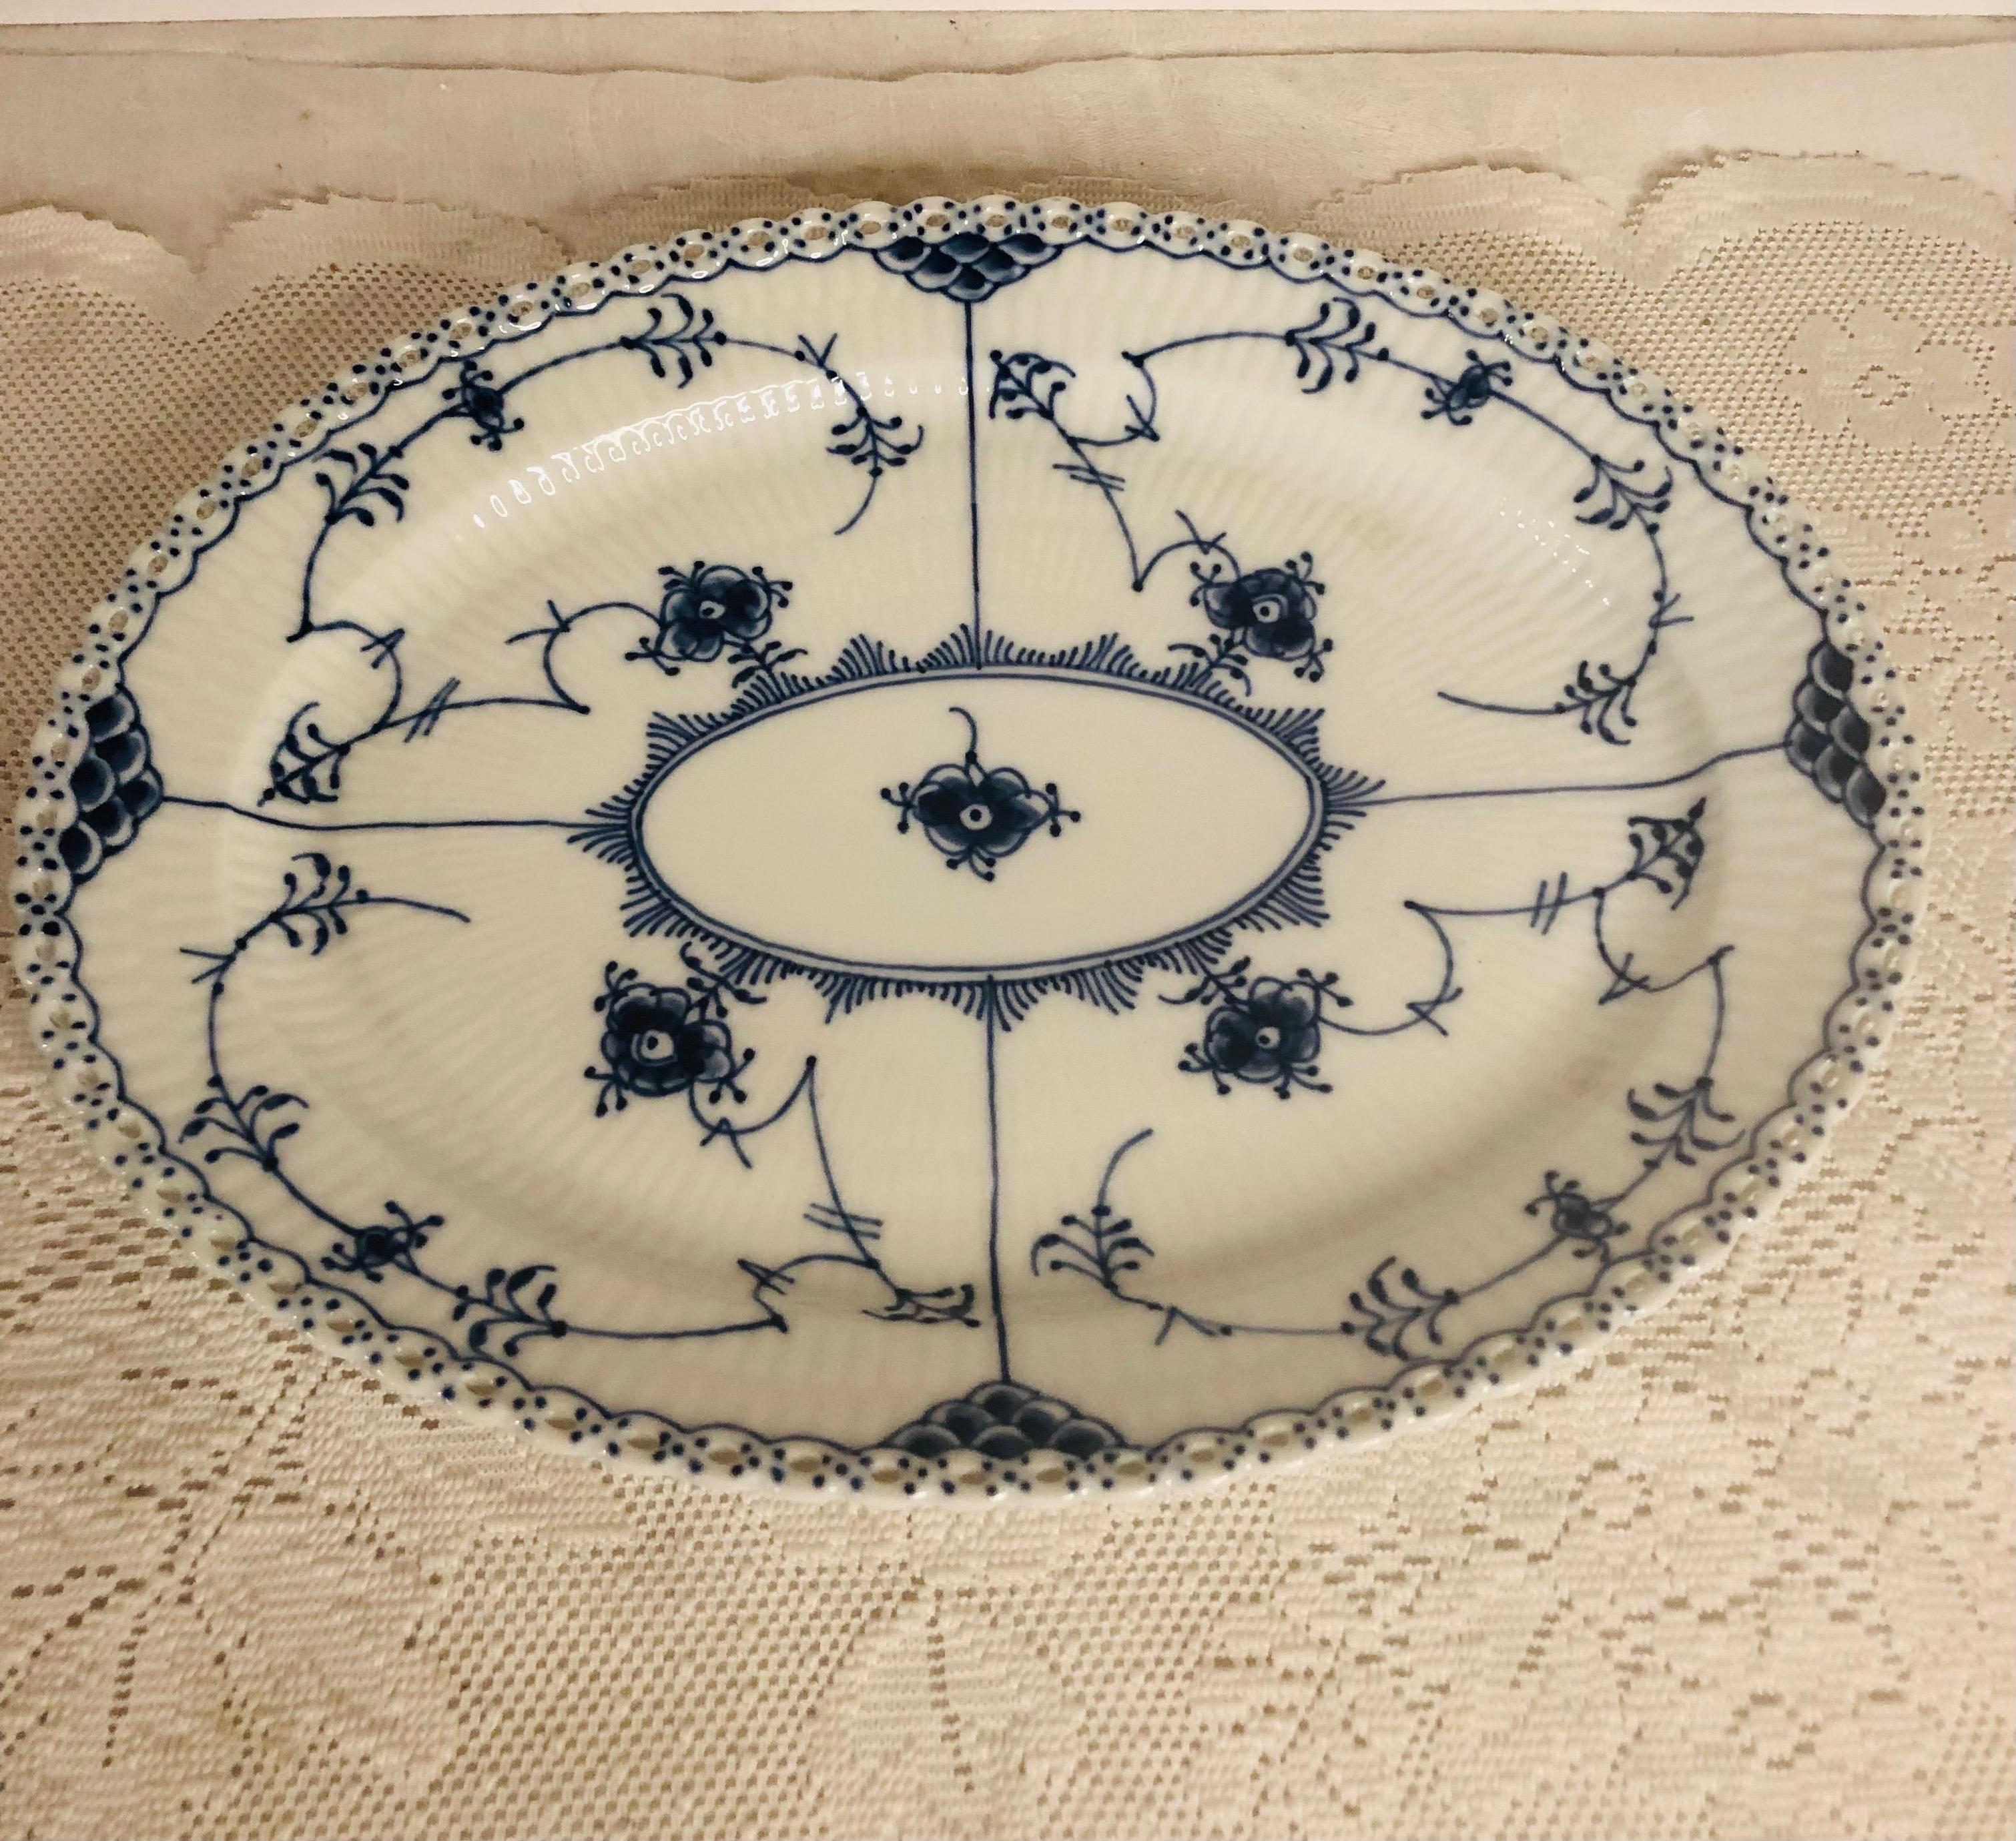 I want to offer you this fabulous Royal Copenhagen platter with full lace openwork design on the borders. This full lace fluted dinnerware was the first dinner service sold by Royal Copenhagen in 1775. In 1885, the artistic director of Royal